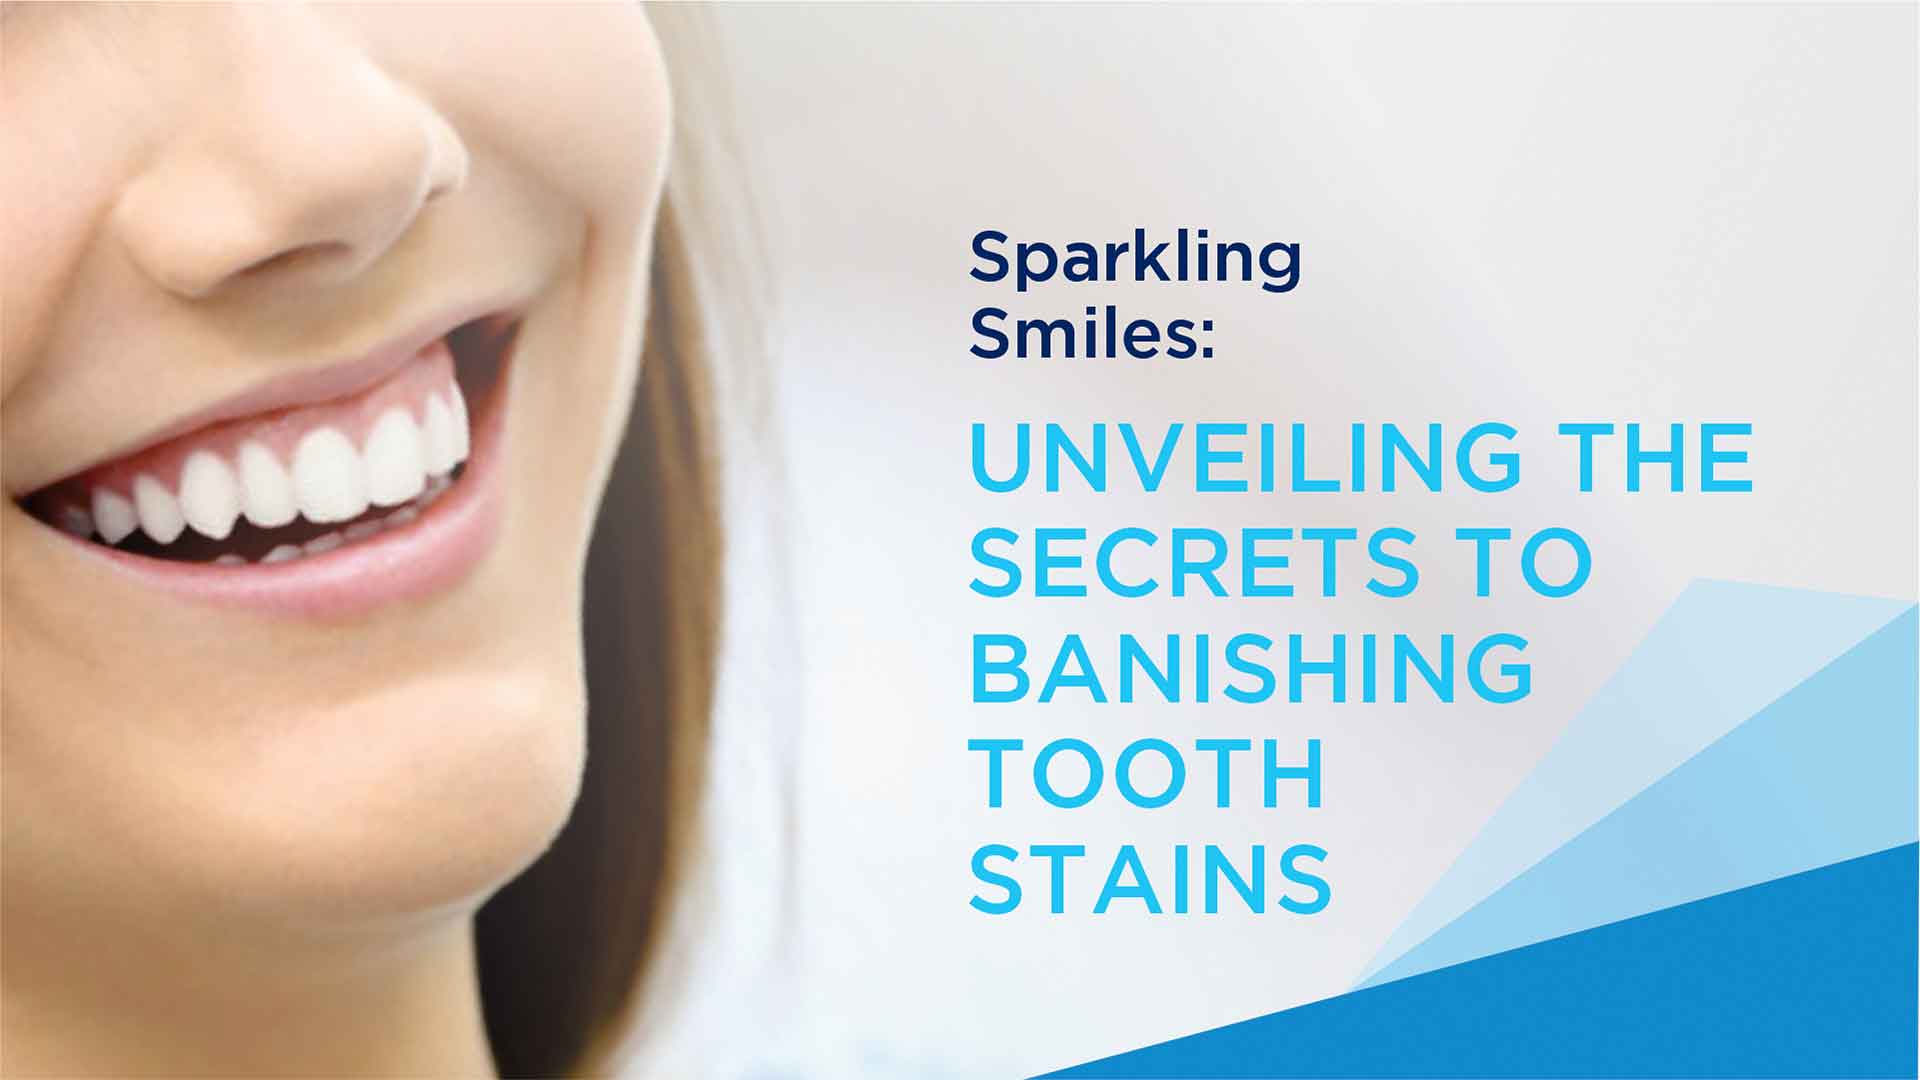 Sparkling Smiles: Unveiling the Secrets to Banishing Tooth Stains